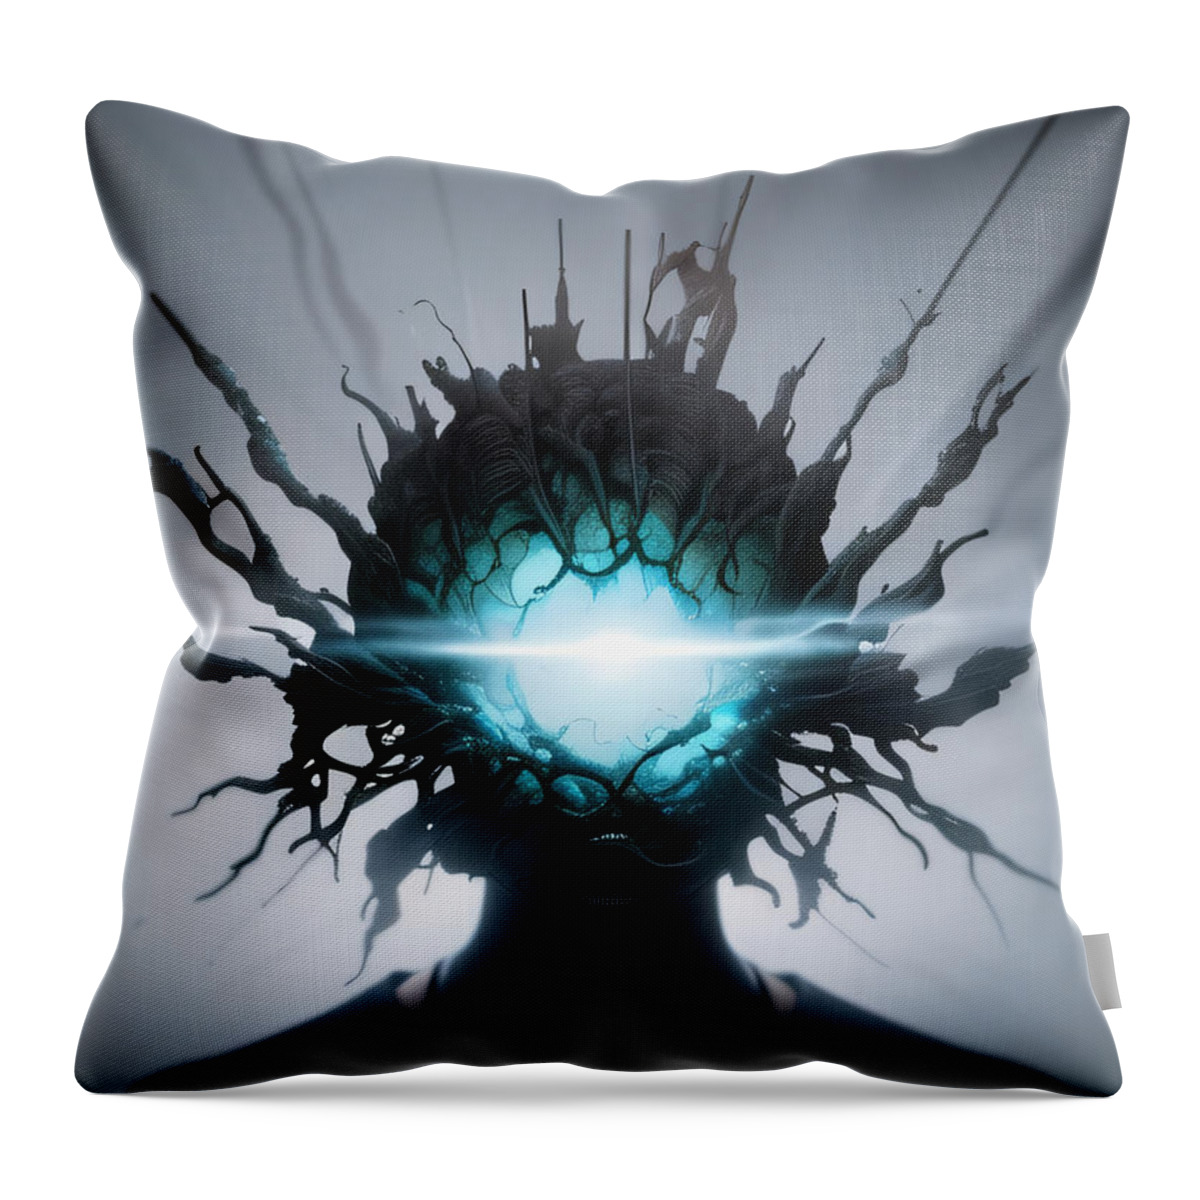 Weird Alien Smoke Mist Atmospheric Concept Art Unique Surreal Mindscape Throw Pillow featuring the digital art Mindscape #1 by Tricky Woo